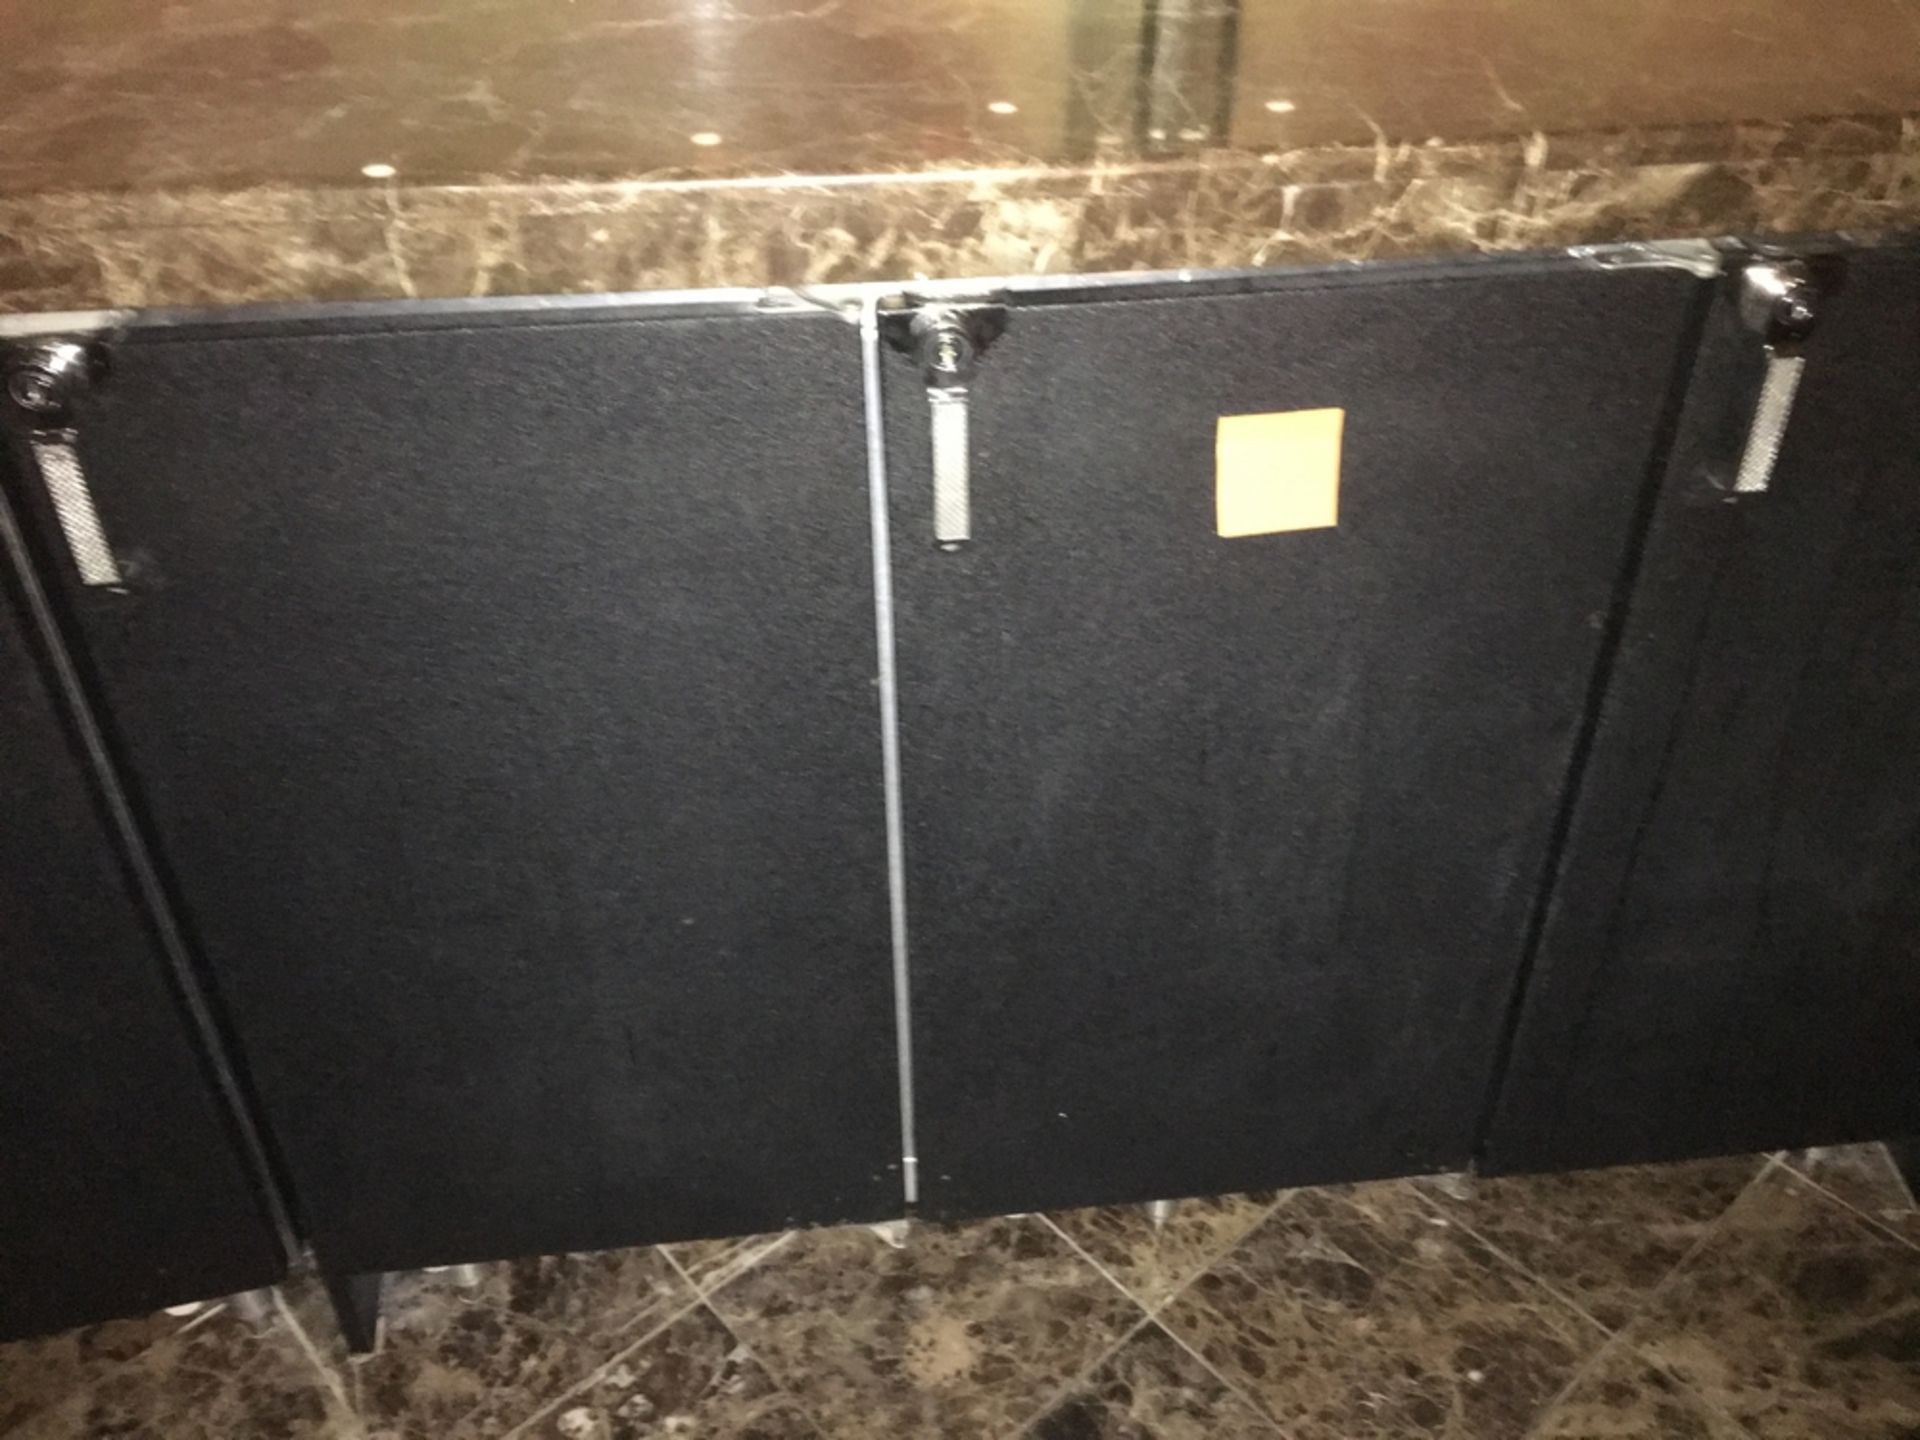 3-door under bar Refrigerators, 2 x 5 x 3 1/2 ft Located: Court-Side Club Asset #: N/A ***NOTE